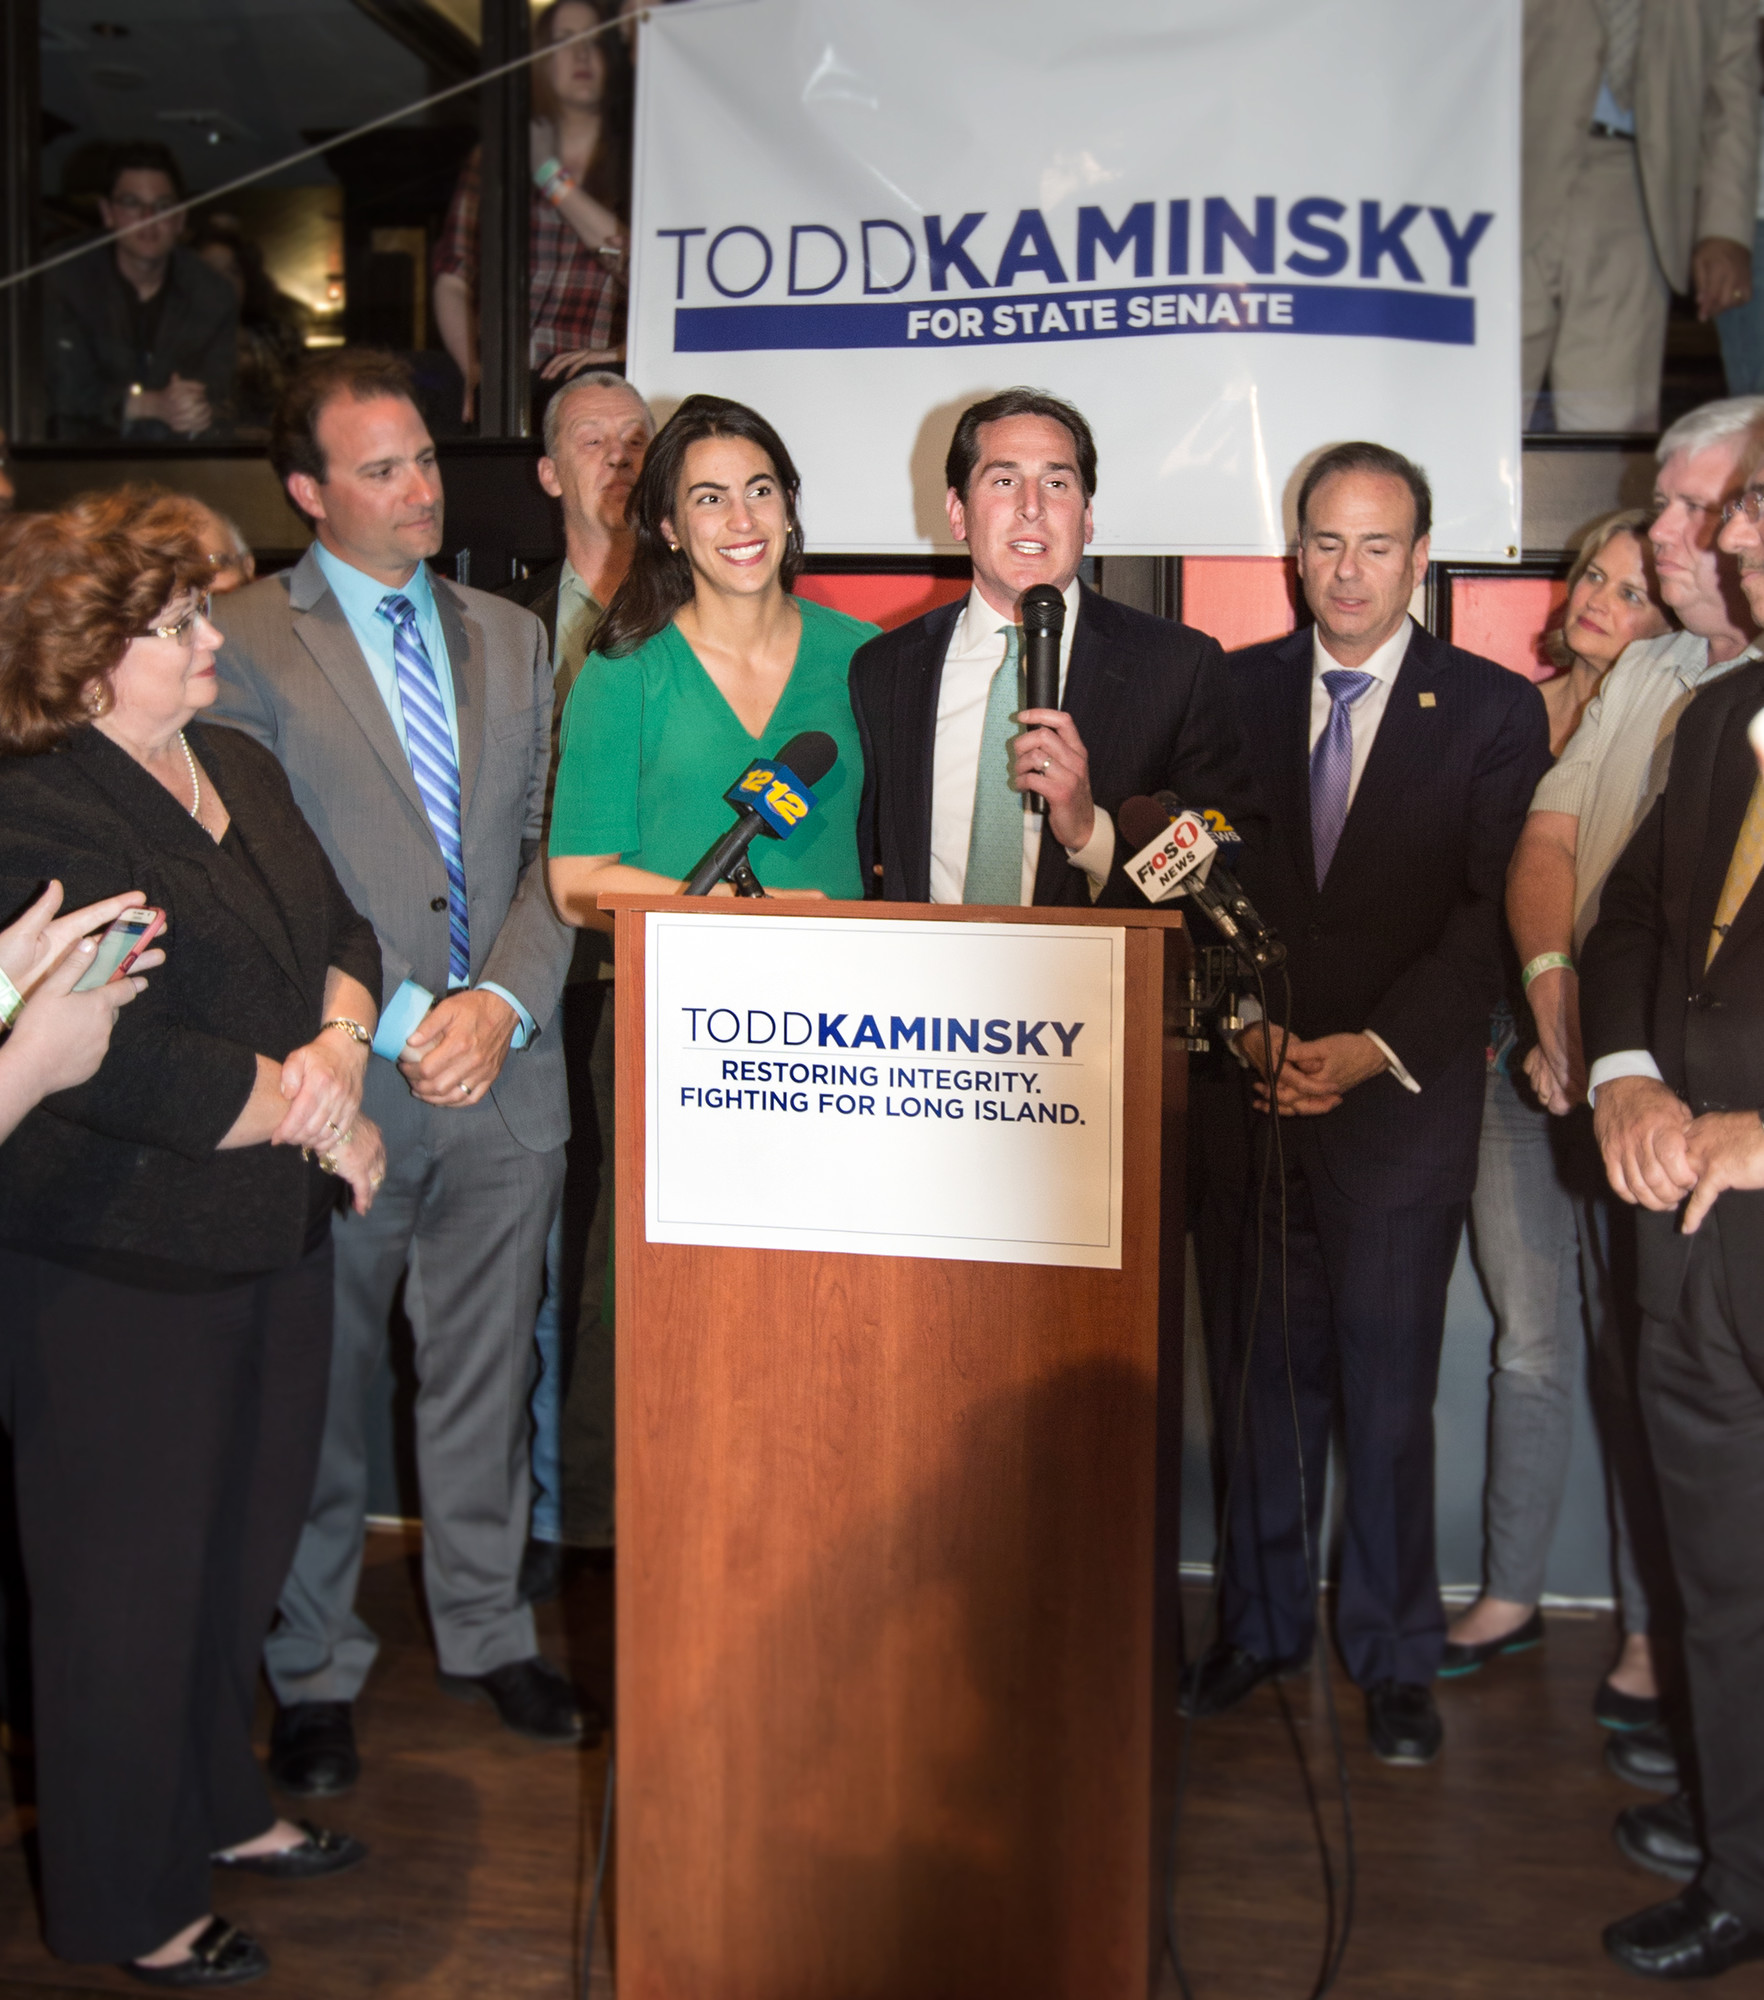 Kaminsky was declared the winner on Monday by the Nassau County Board of Elections.